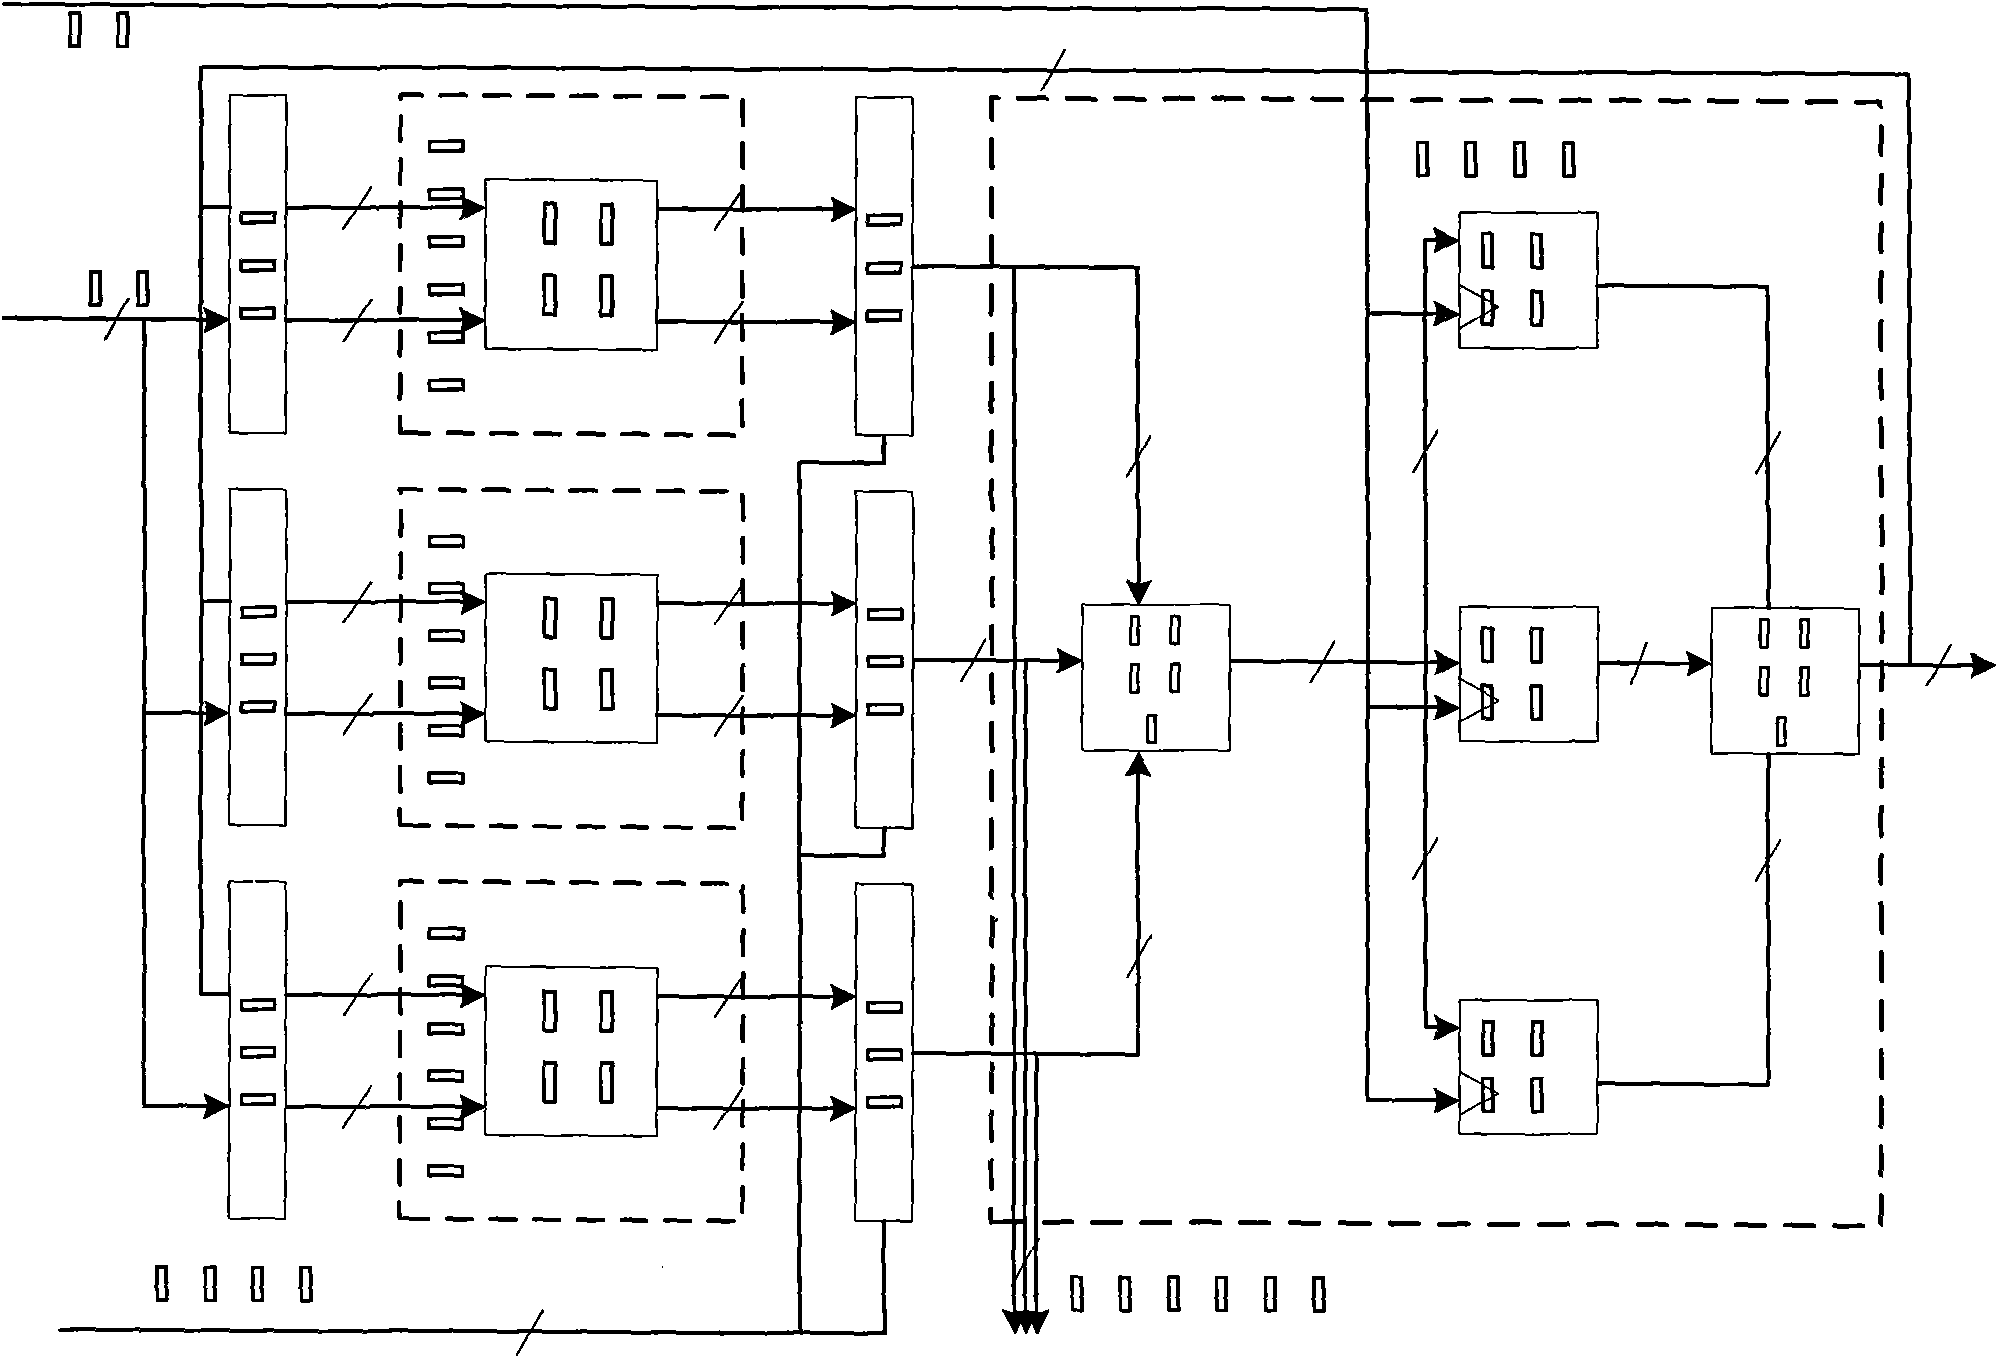 Online detection fault-tolerance system of FPGA (Field programmable Gate Array) digital sequential circuit of SRAM (Static Random Access Memory) type and method